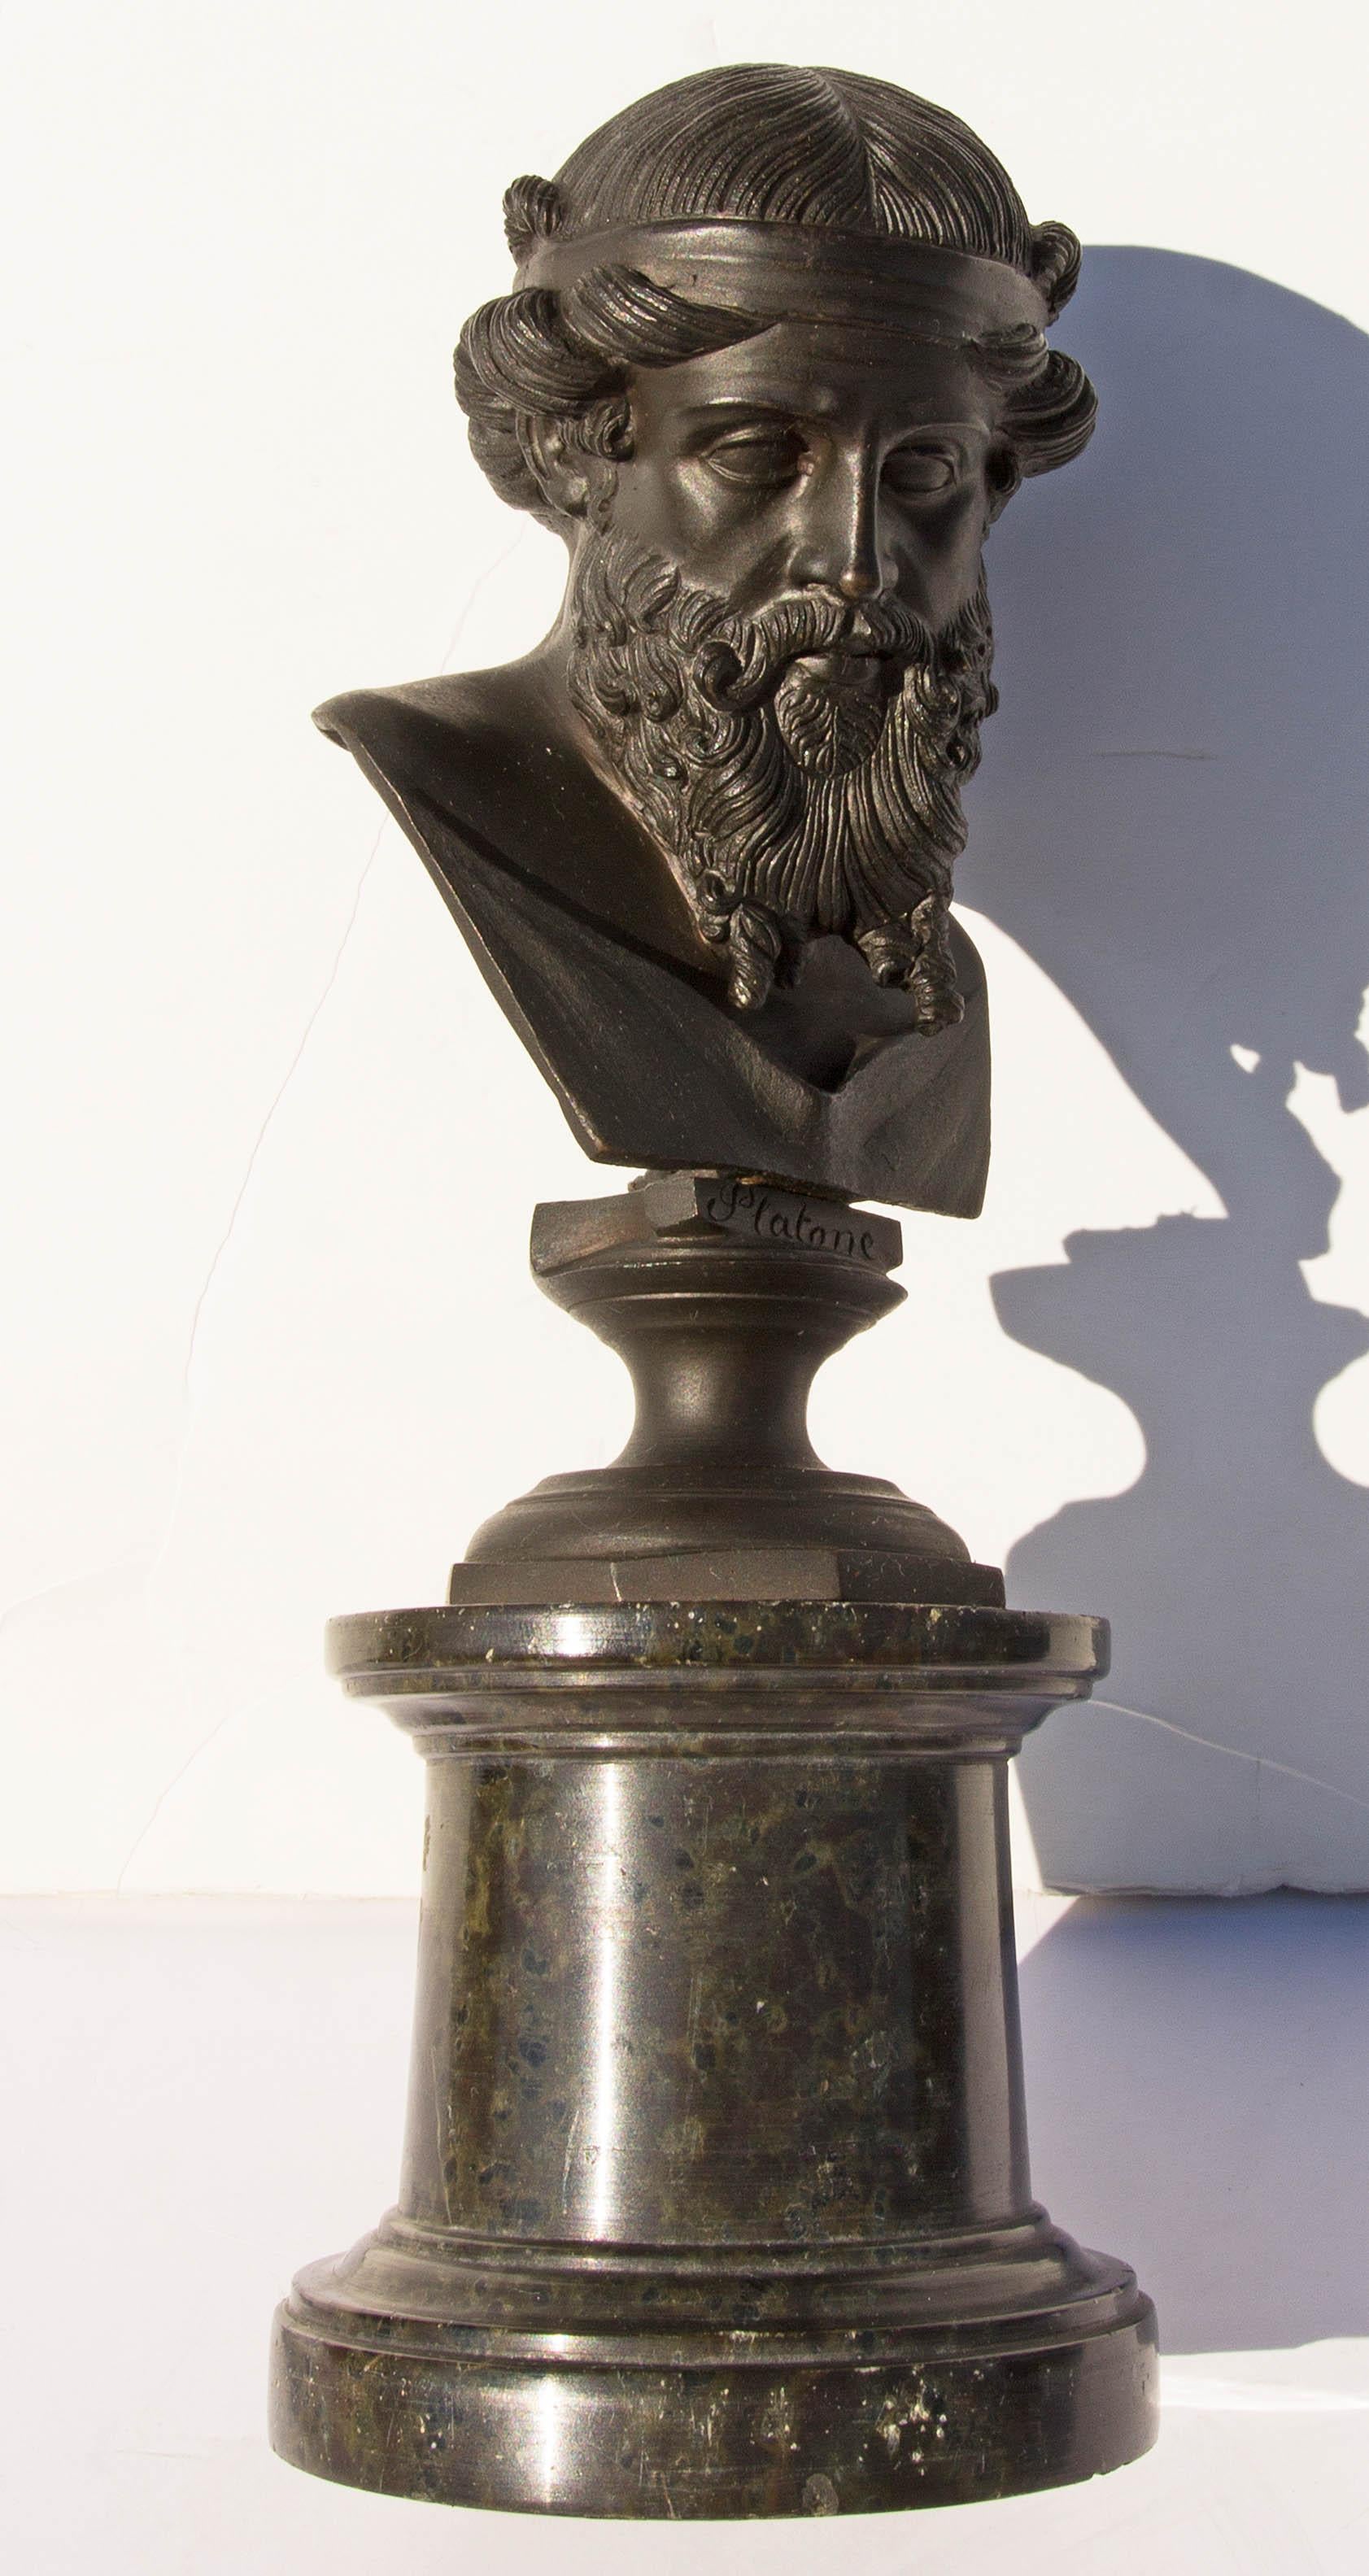 Grand Tour bronze bust of Dionysius. After the original ancient bust found in Herculaneum. Mounted on a marble column. The model is occasionally, alternately identified as Plato or Poseidon.
 